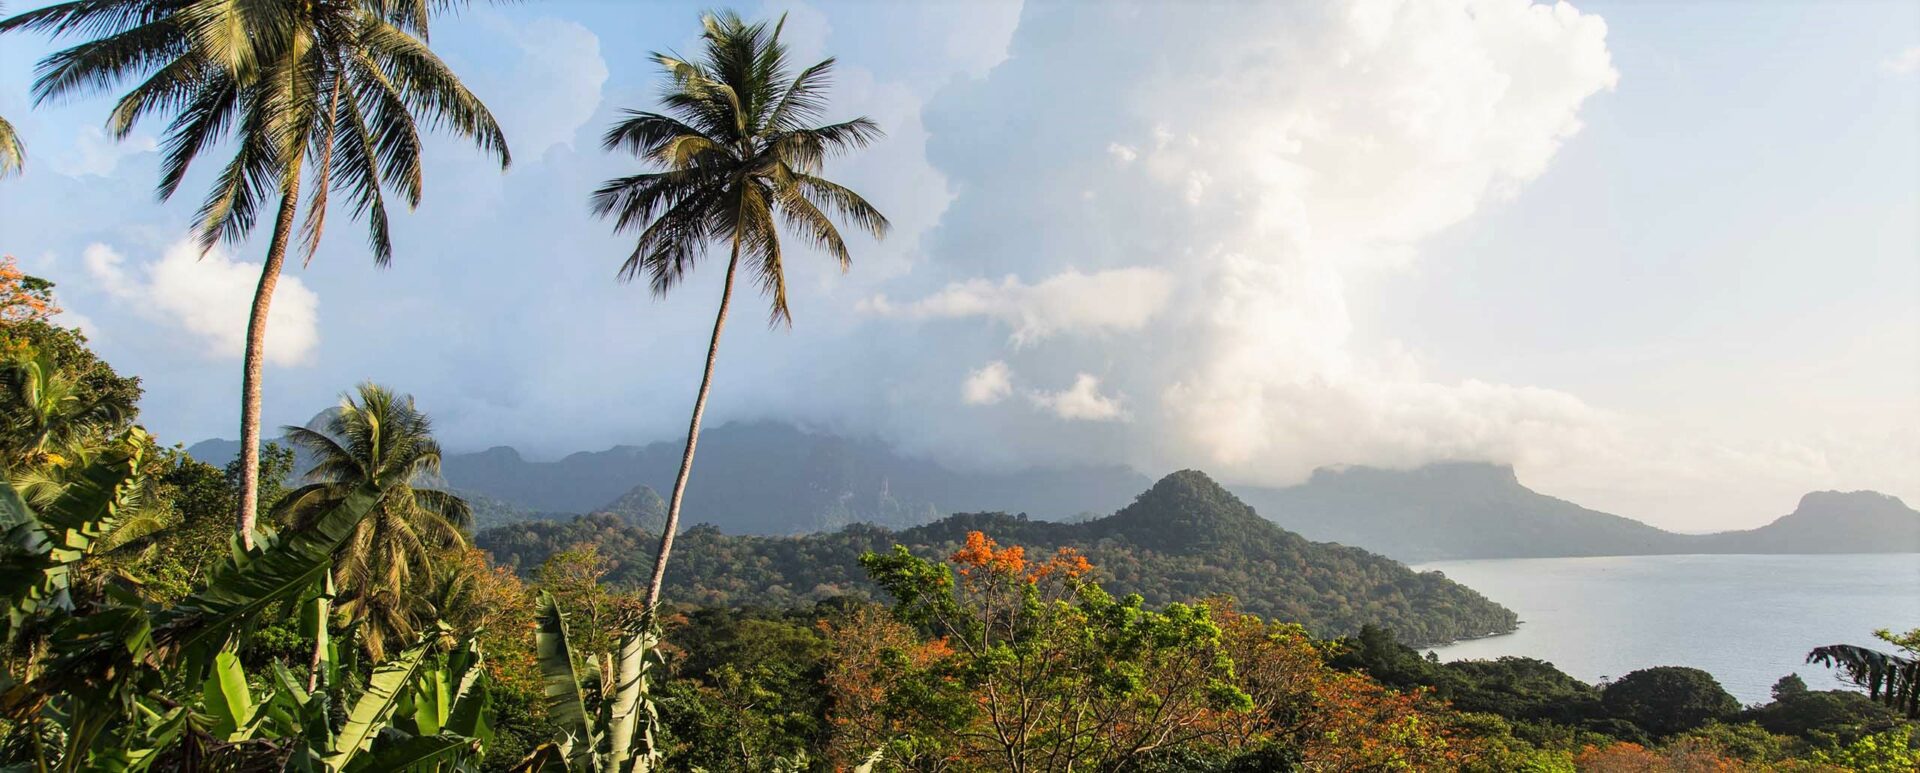 best places to go hiking in the world include Sao Tome + Principe